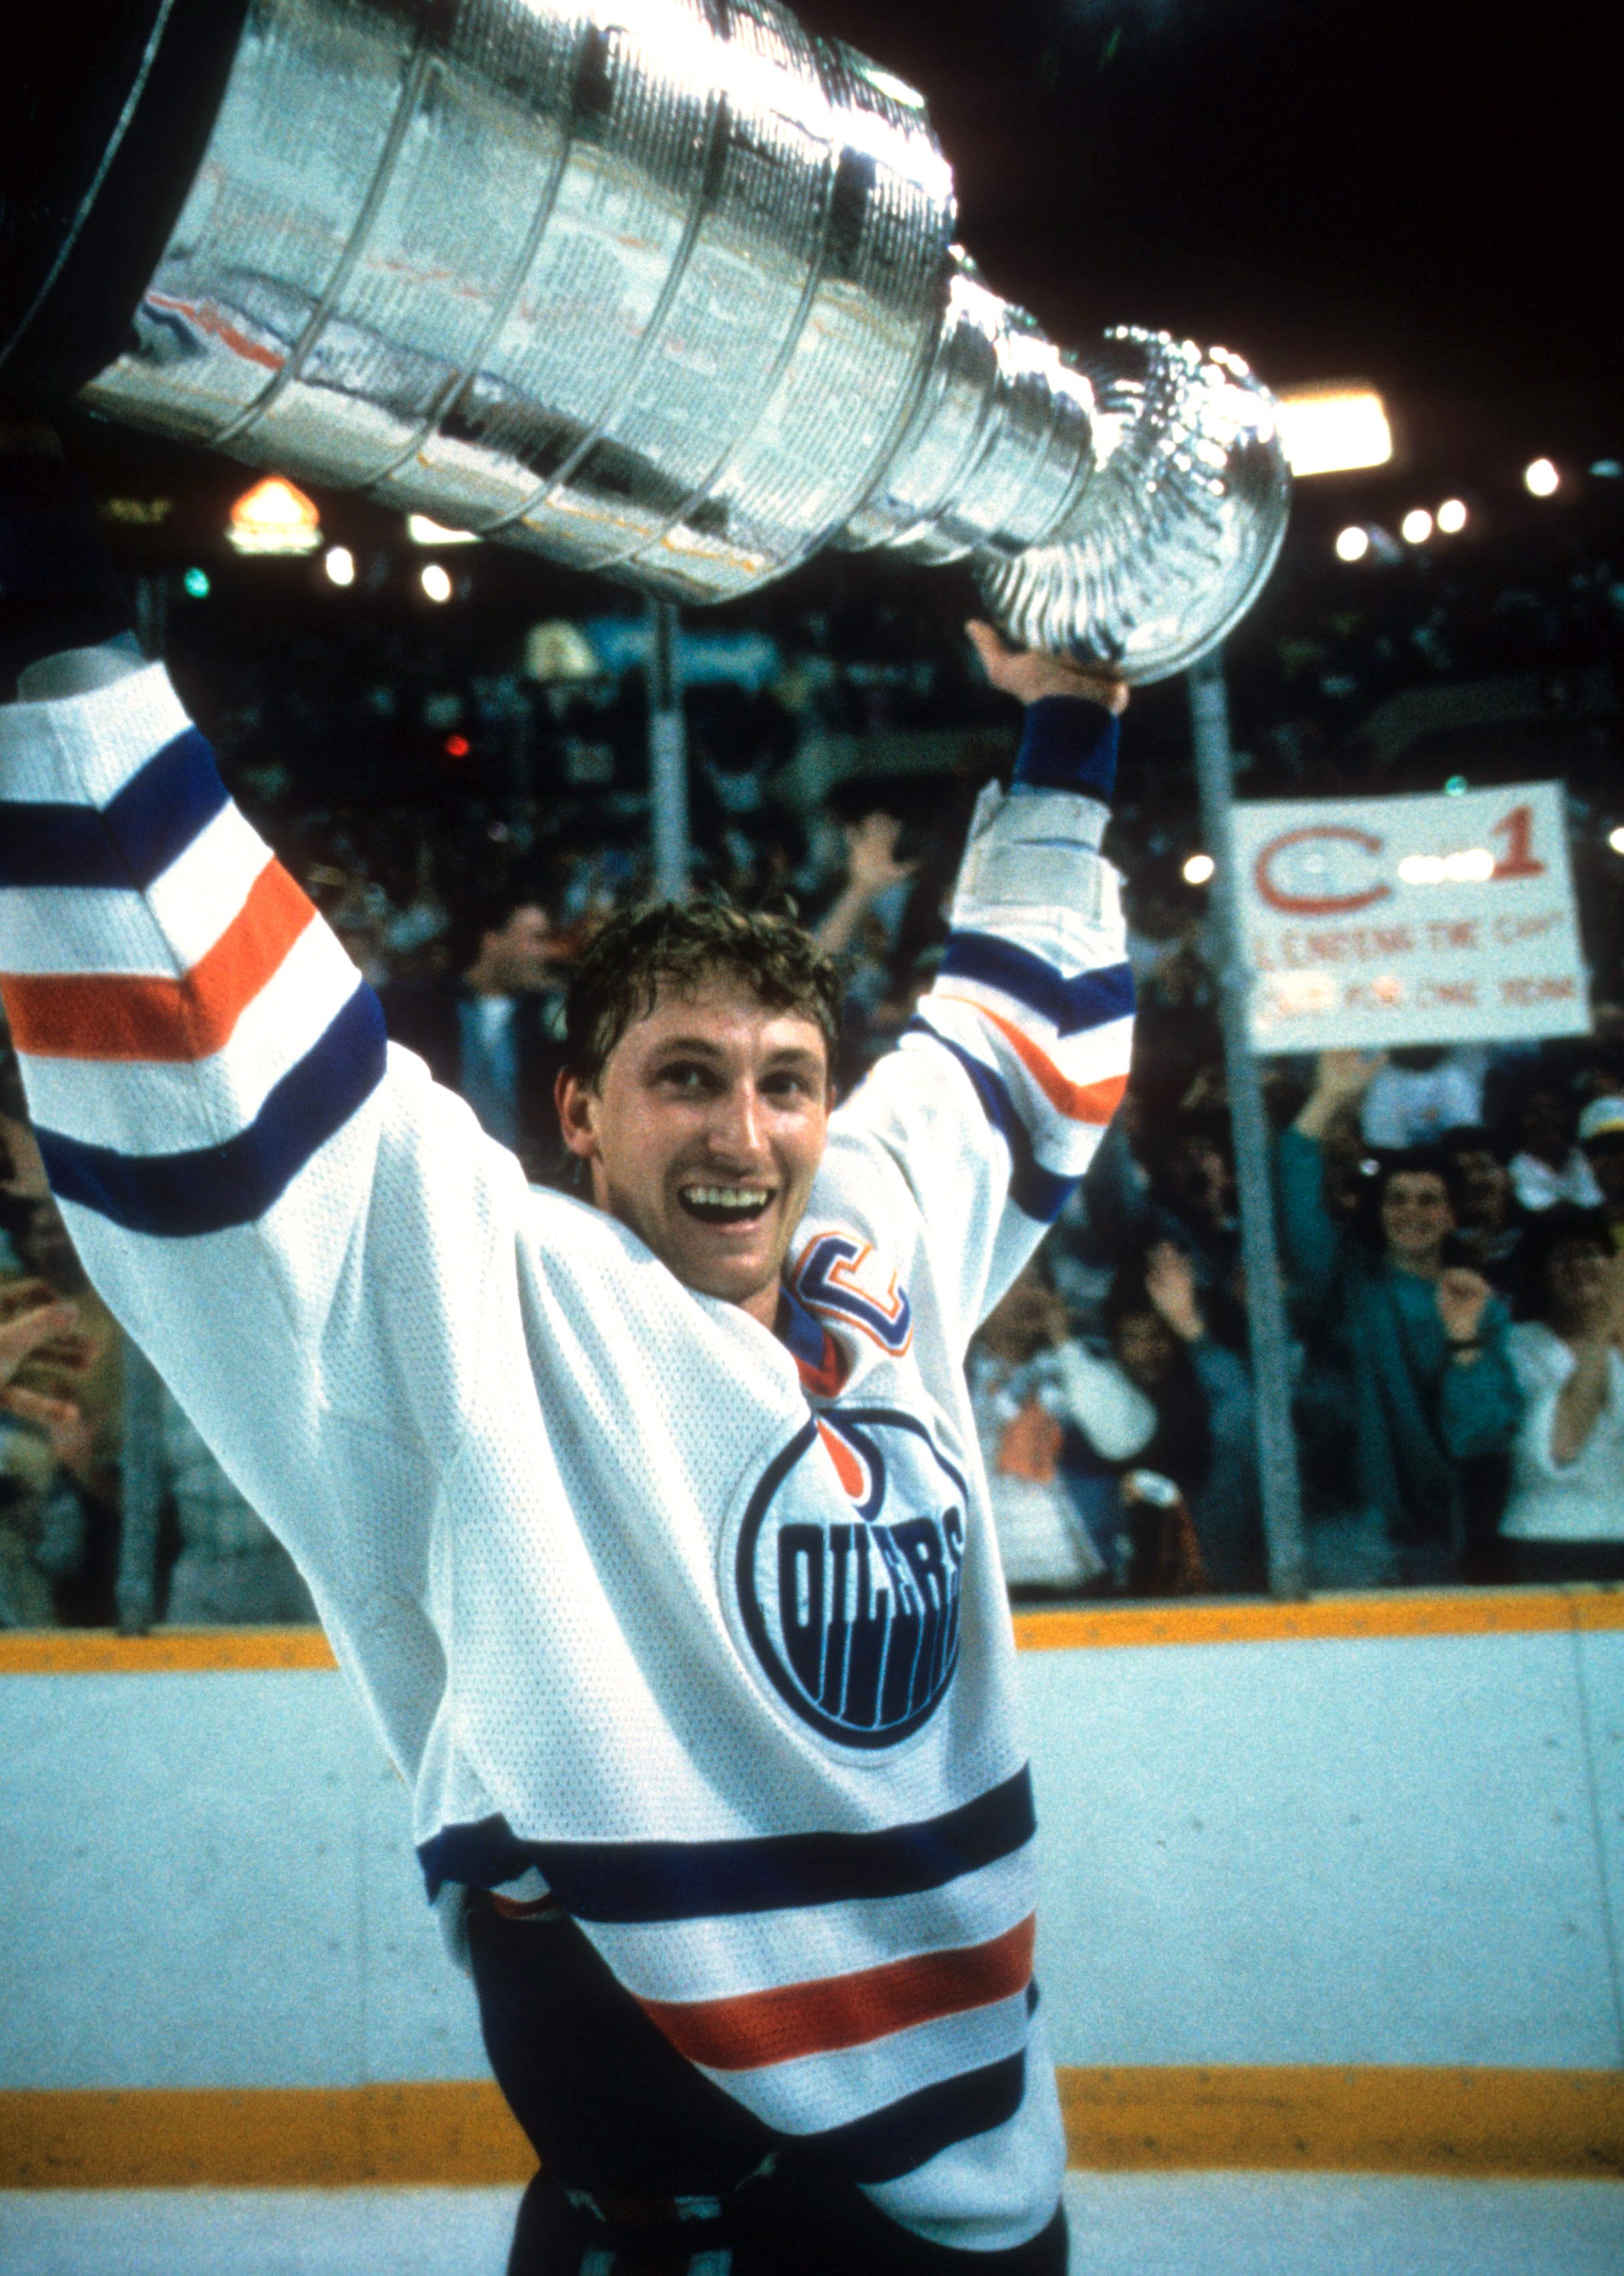 Wayne Gretzky #99 of the Edmonton Oilers recieves the Stanley Cup Trophy after the Oilers defeated the Philadelphia Flyers in Game 7 of the 1987 Stanley Cup Finals on May 31, 1987 at the Northlands Coliseum in Edmonton, Alberta, Canada. (Bruce Bennett/Getty Images)